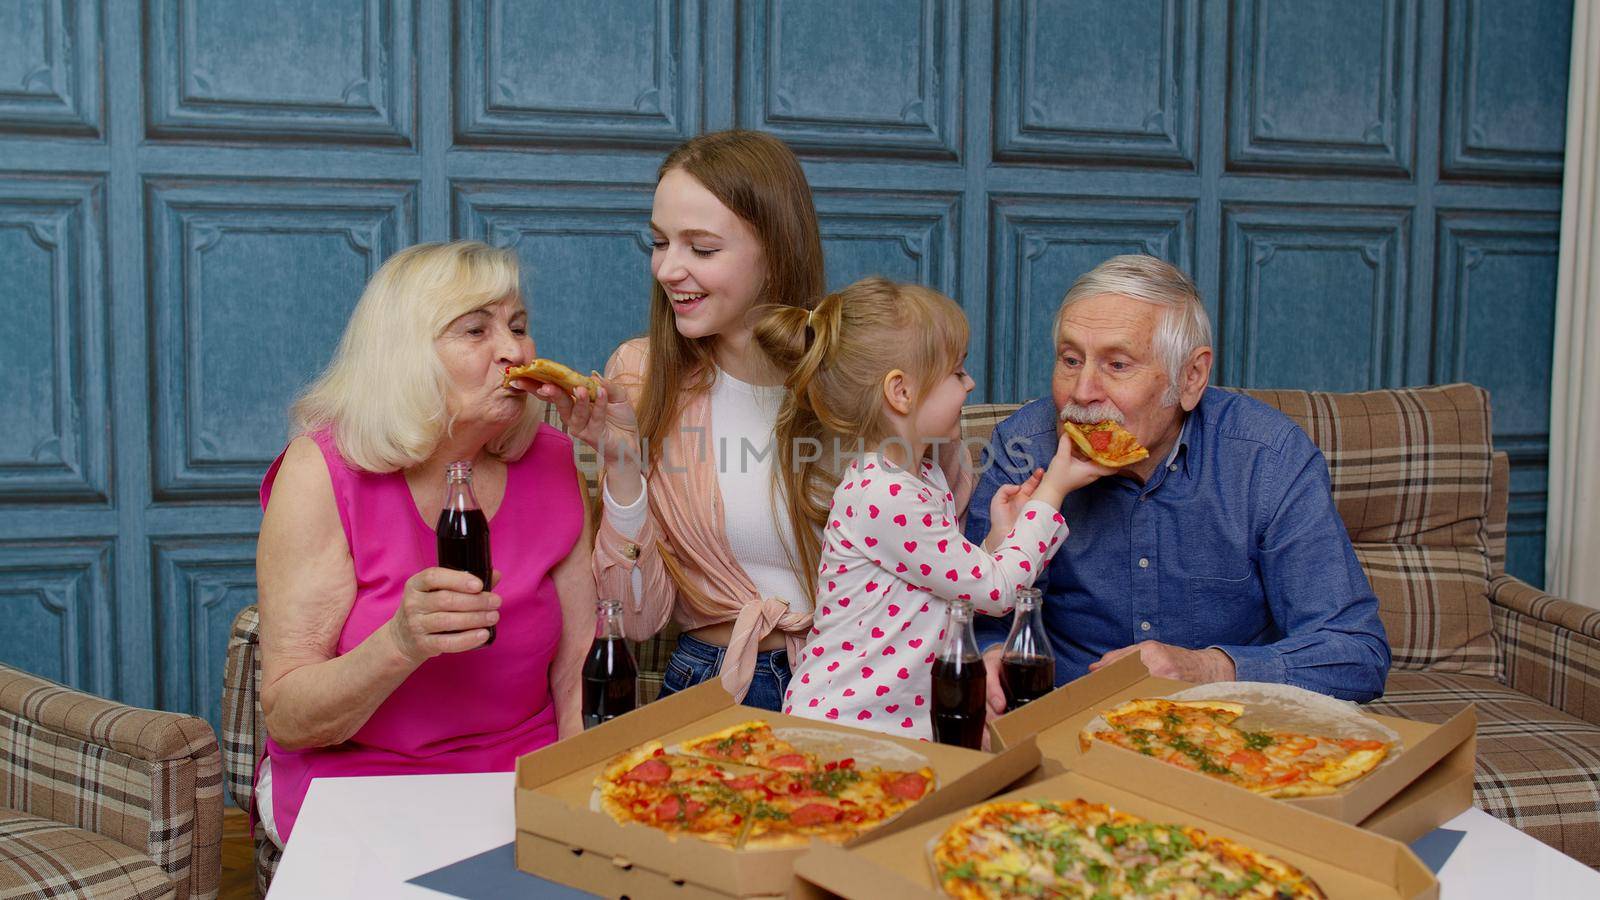 Family having lunch party, feed each other with pizza, laughing, enjoying meal together at home by efuror